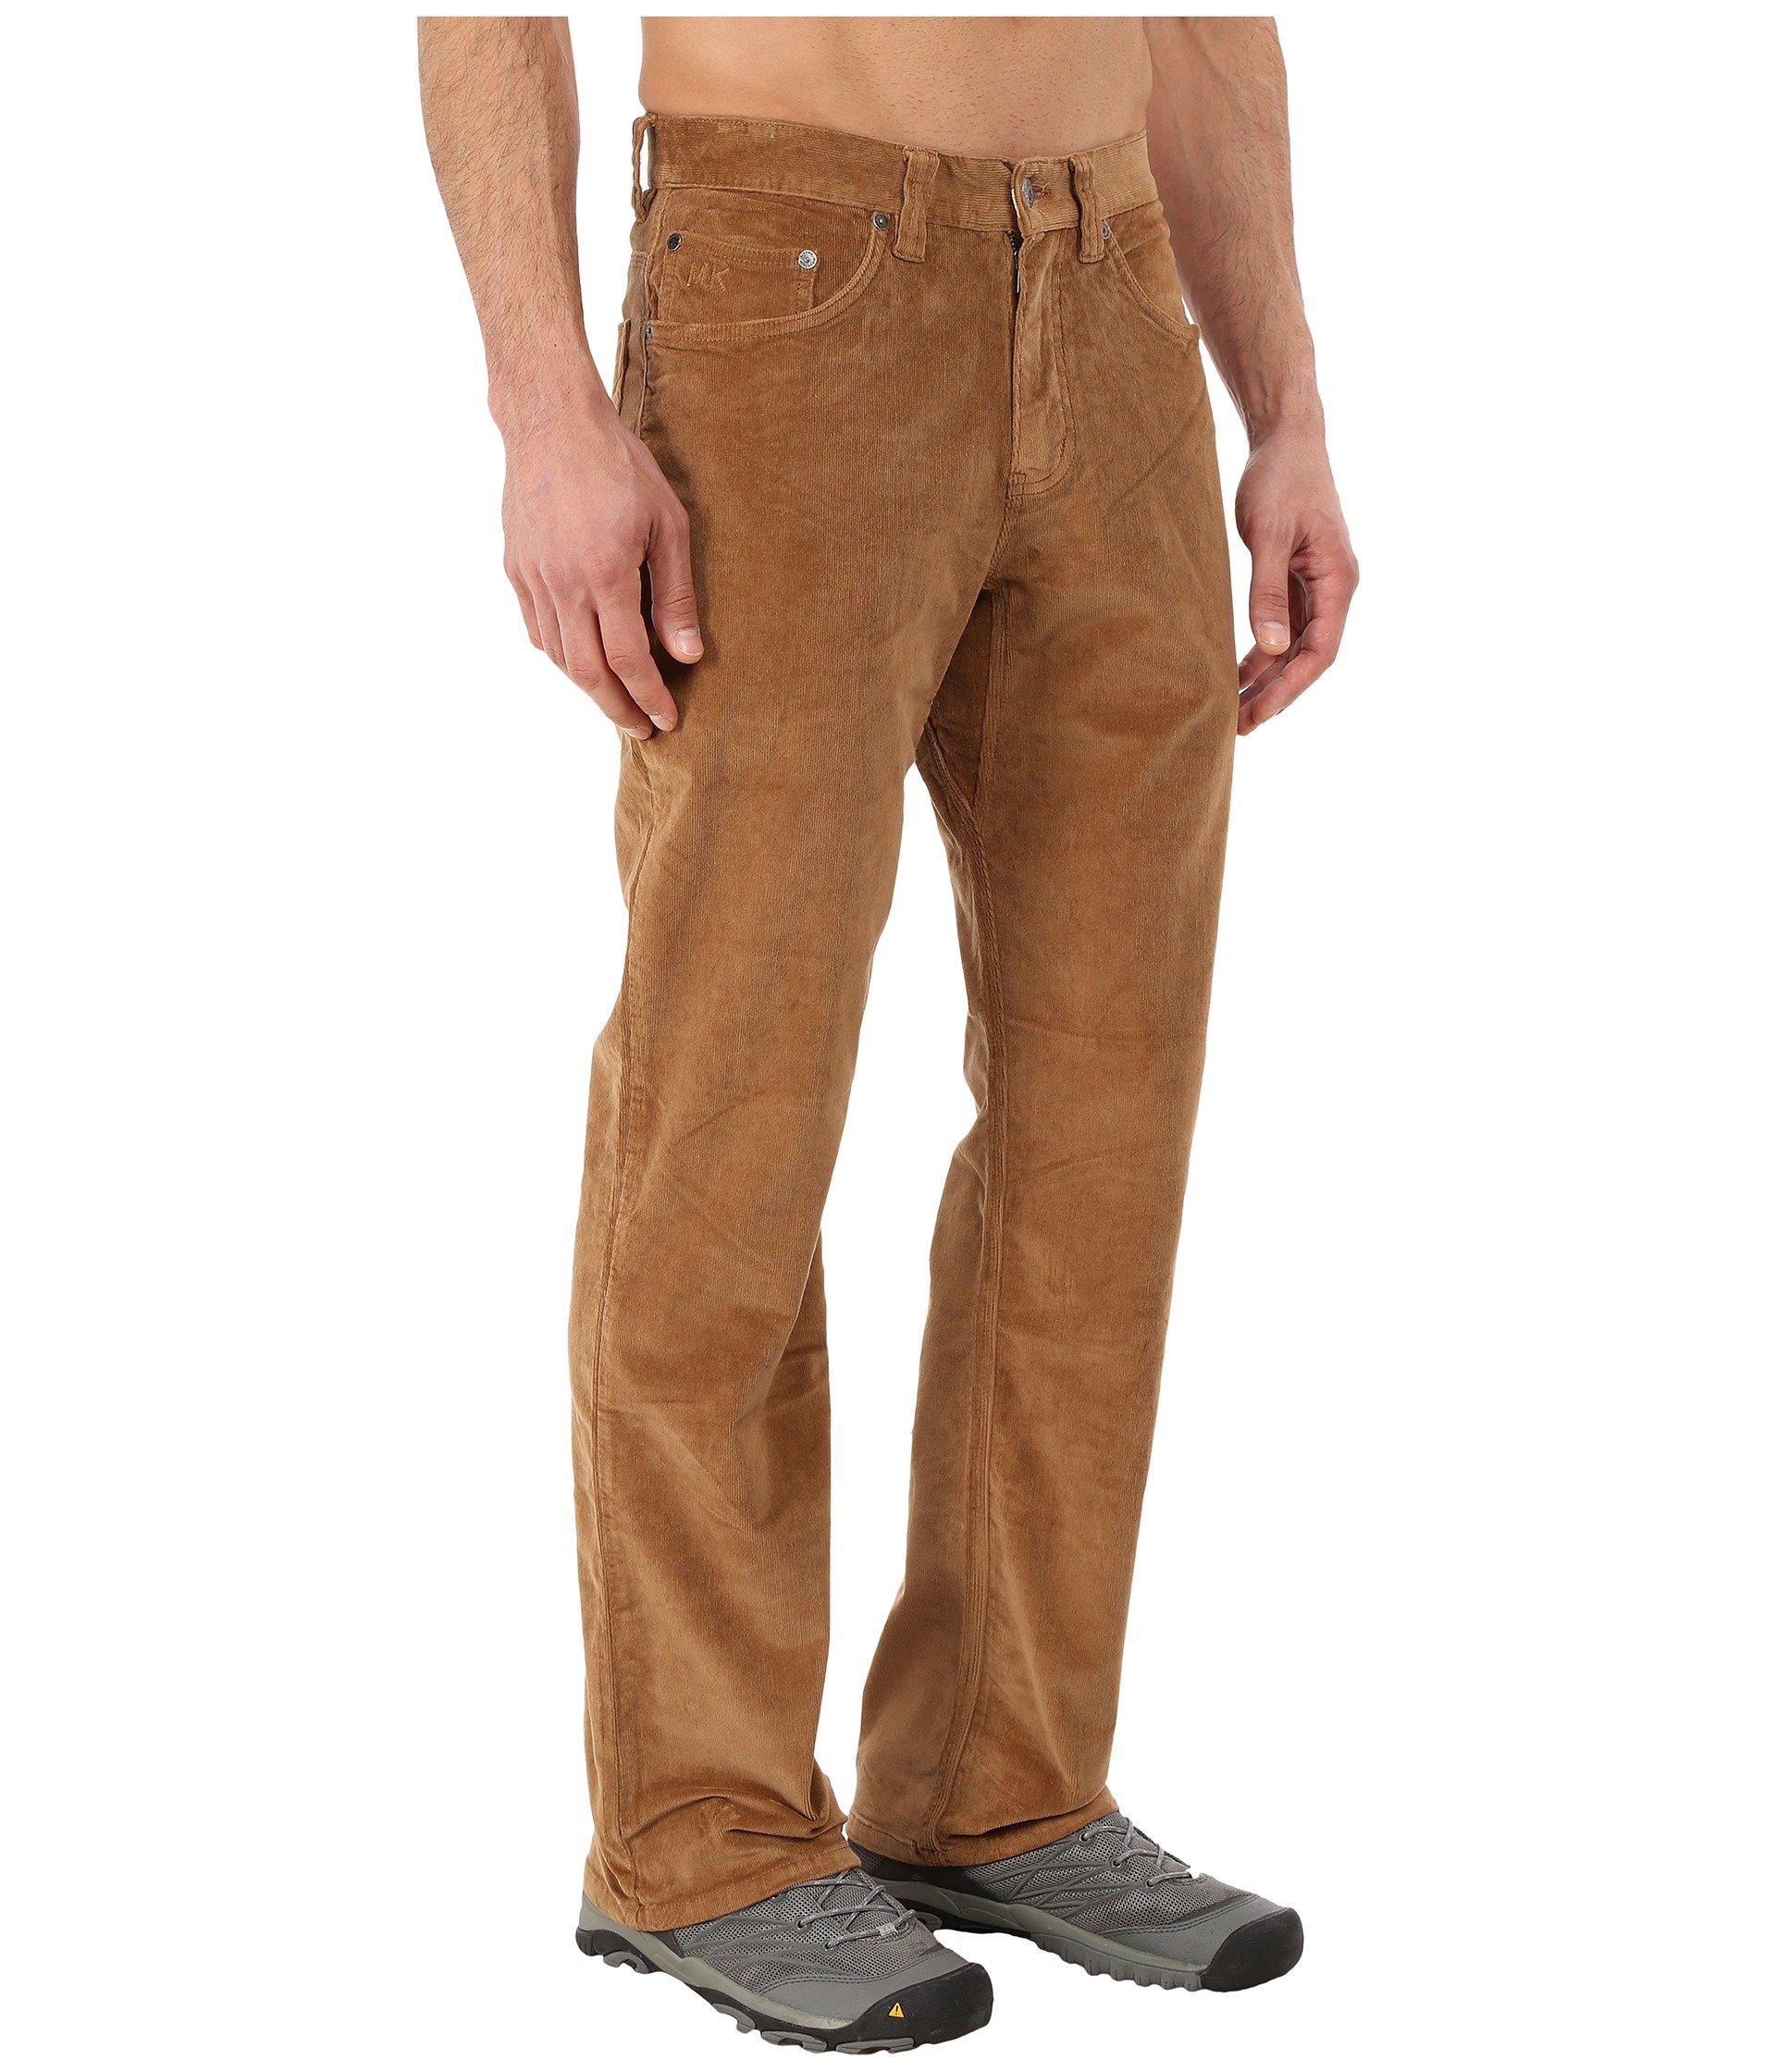 Mountain Khakis Canyon Cord Pants in Brown for Men - Lyst